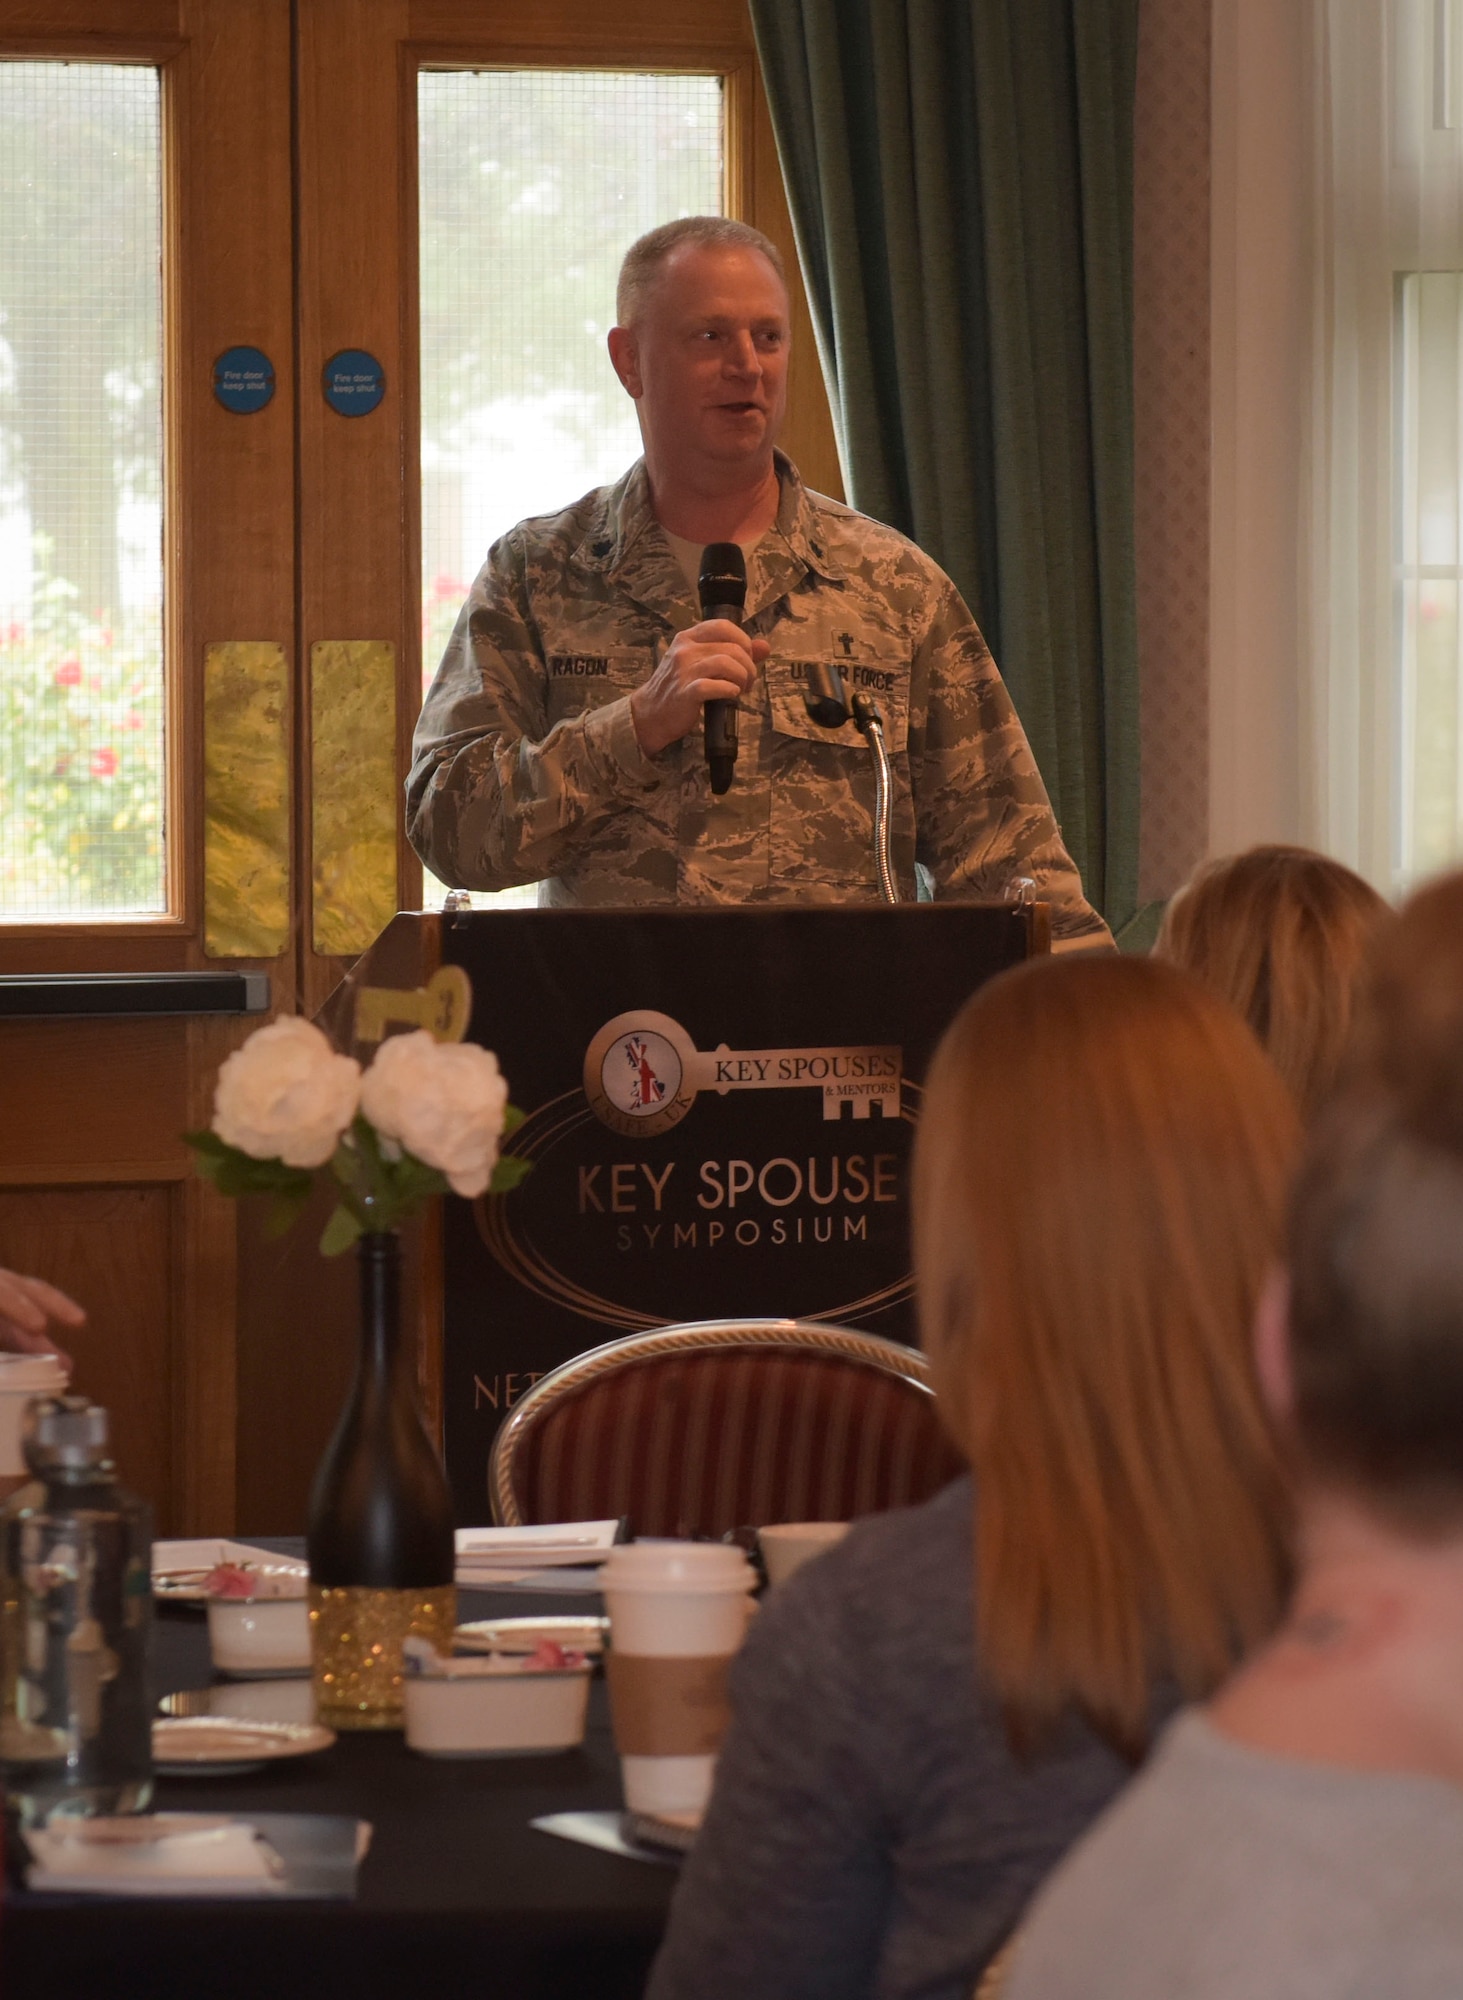 U.S. Air Force Chap. (Lt Col.) Ronald Ragon, 100th Air Refueling Wing chaplain, gives an opening welcome for the third annual Key Spouses Symposium hosted by Team Mildenhall Key Spouses at RAF Mildenhall, England, Oct. 4, 2018. More 250 spouses attended the third annual Key Spouses Symposium, where they shared ideas and strategies that worked for their units, and discussed steps to more effectively support for their squadron. (U.S. Air Force photo by Airman 1st Class Alexandria Lee)